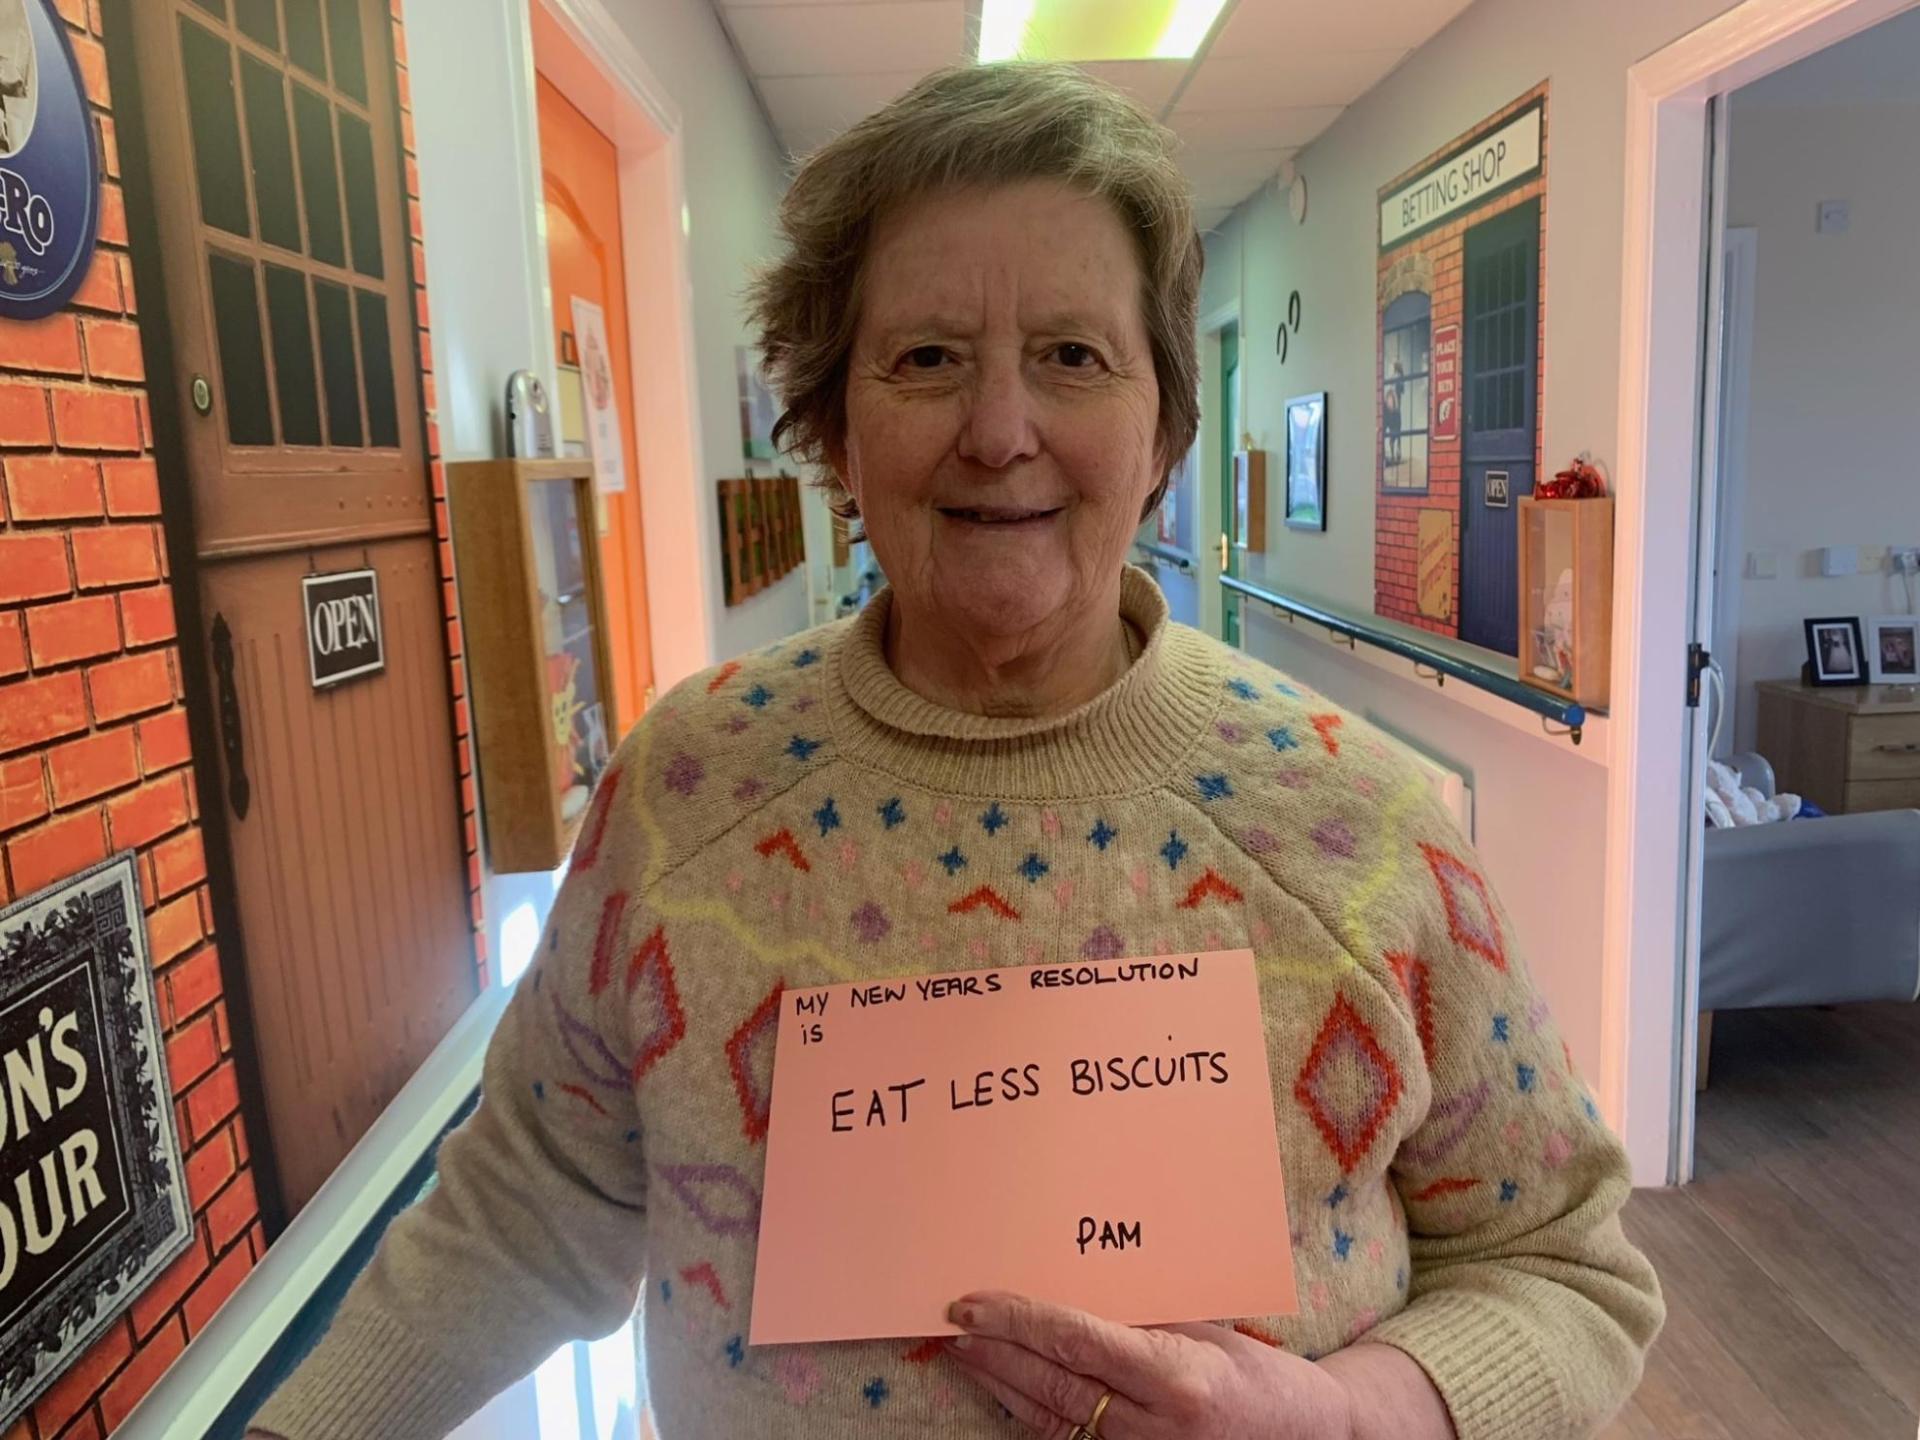 New Year's Resolution from the residents at Paddock Stile Manor Dementia Care Home